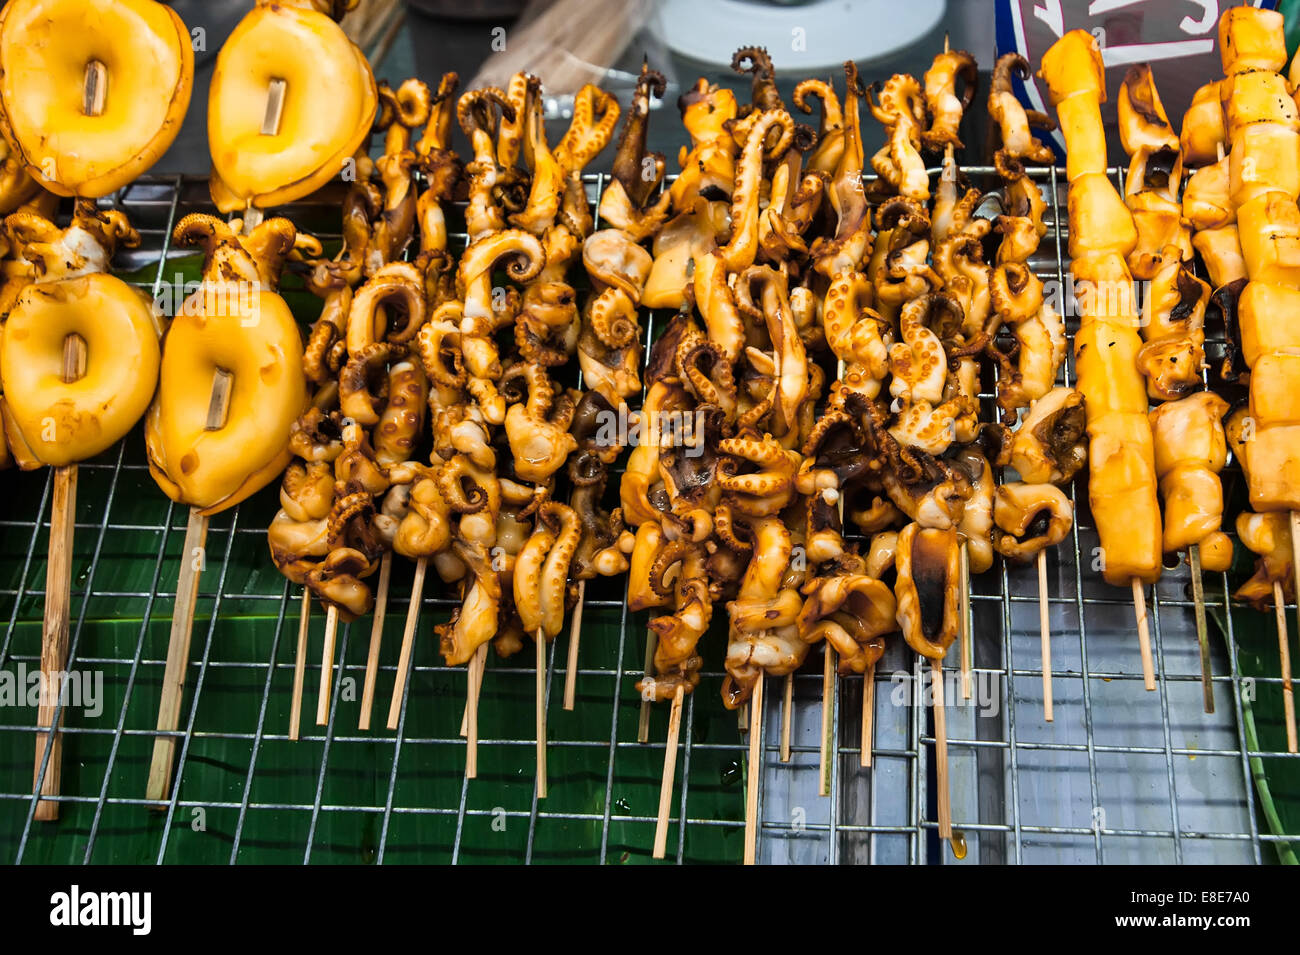 Traditional asian food at market. Grilled seafood on sticks. Calamari, octopus and cuttlefish. Loas Stock Photo